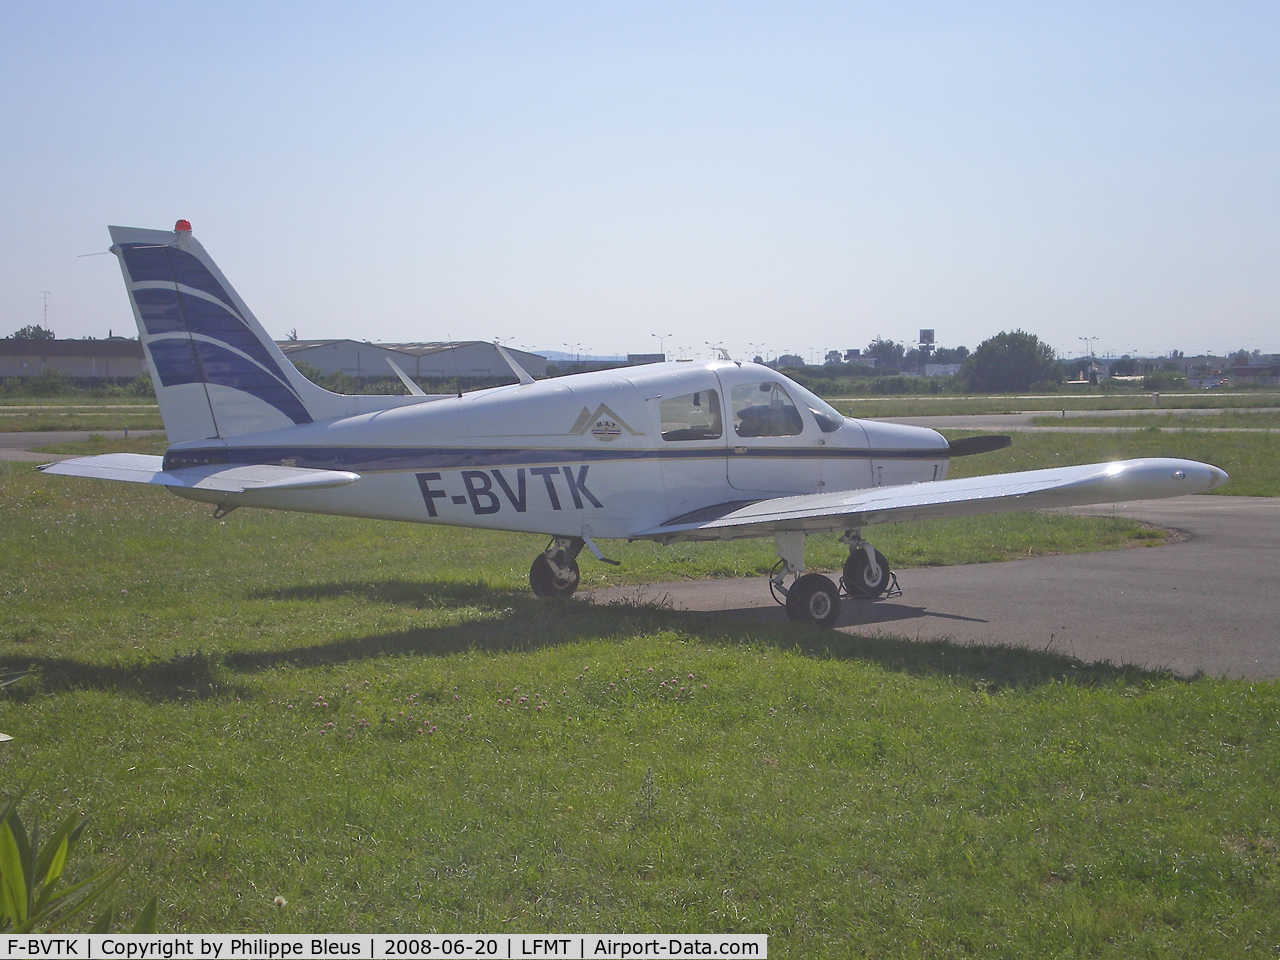 F-BVTK, Piper PA-28-140 Cherokee C/N 28-7425255, Parked in the sun close to the 